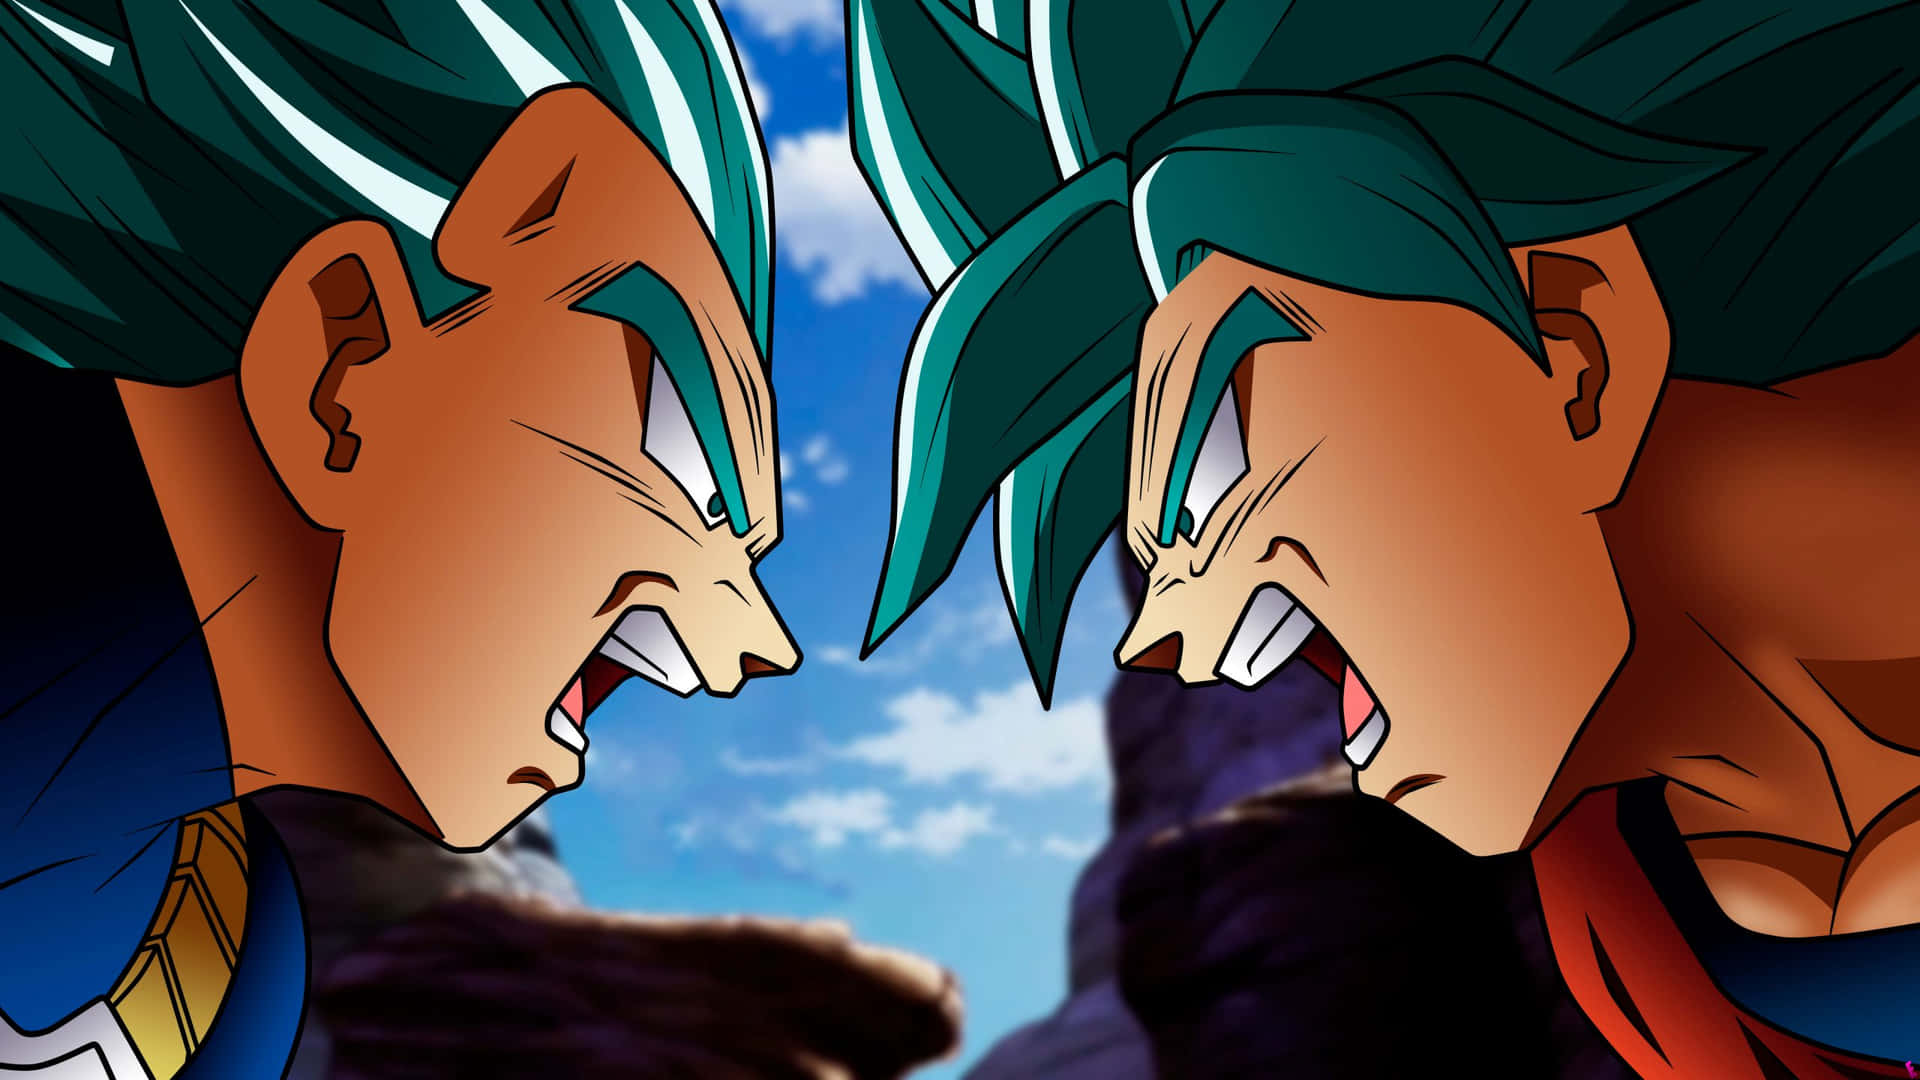 "Goku and Vegeta stare off in epic battle in the anime classic, Dragon Ball Z" Wallpaper